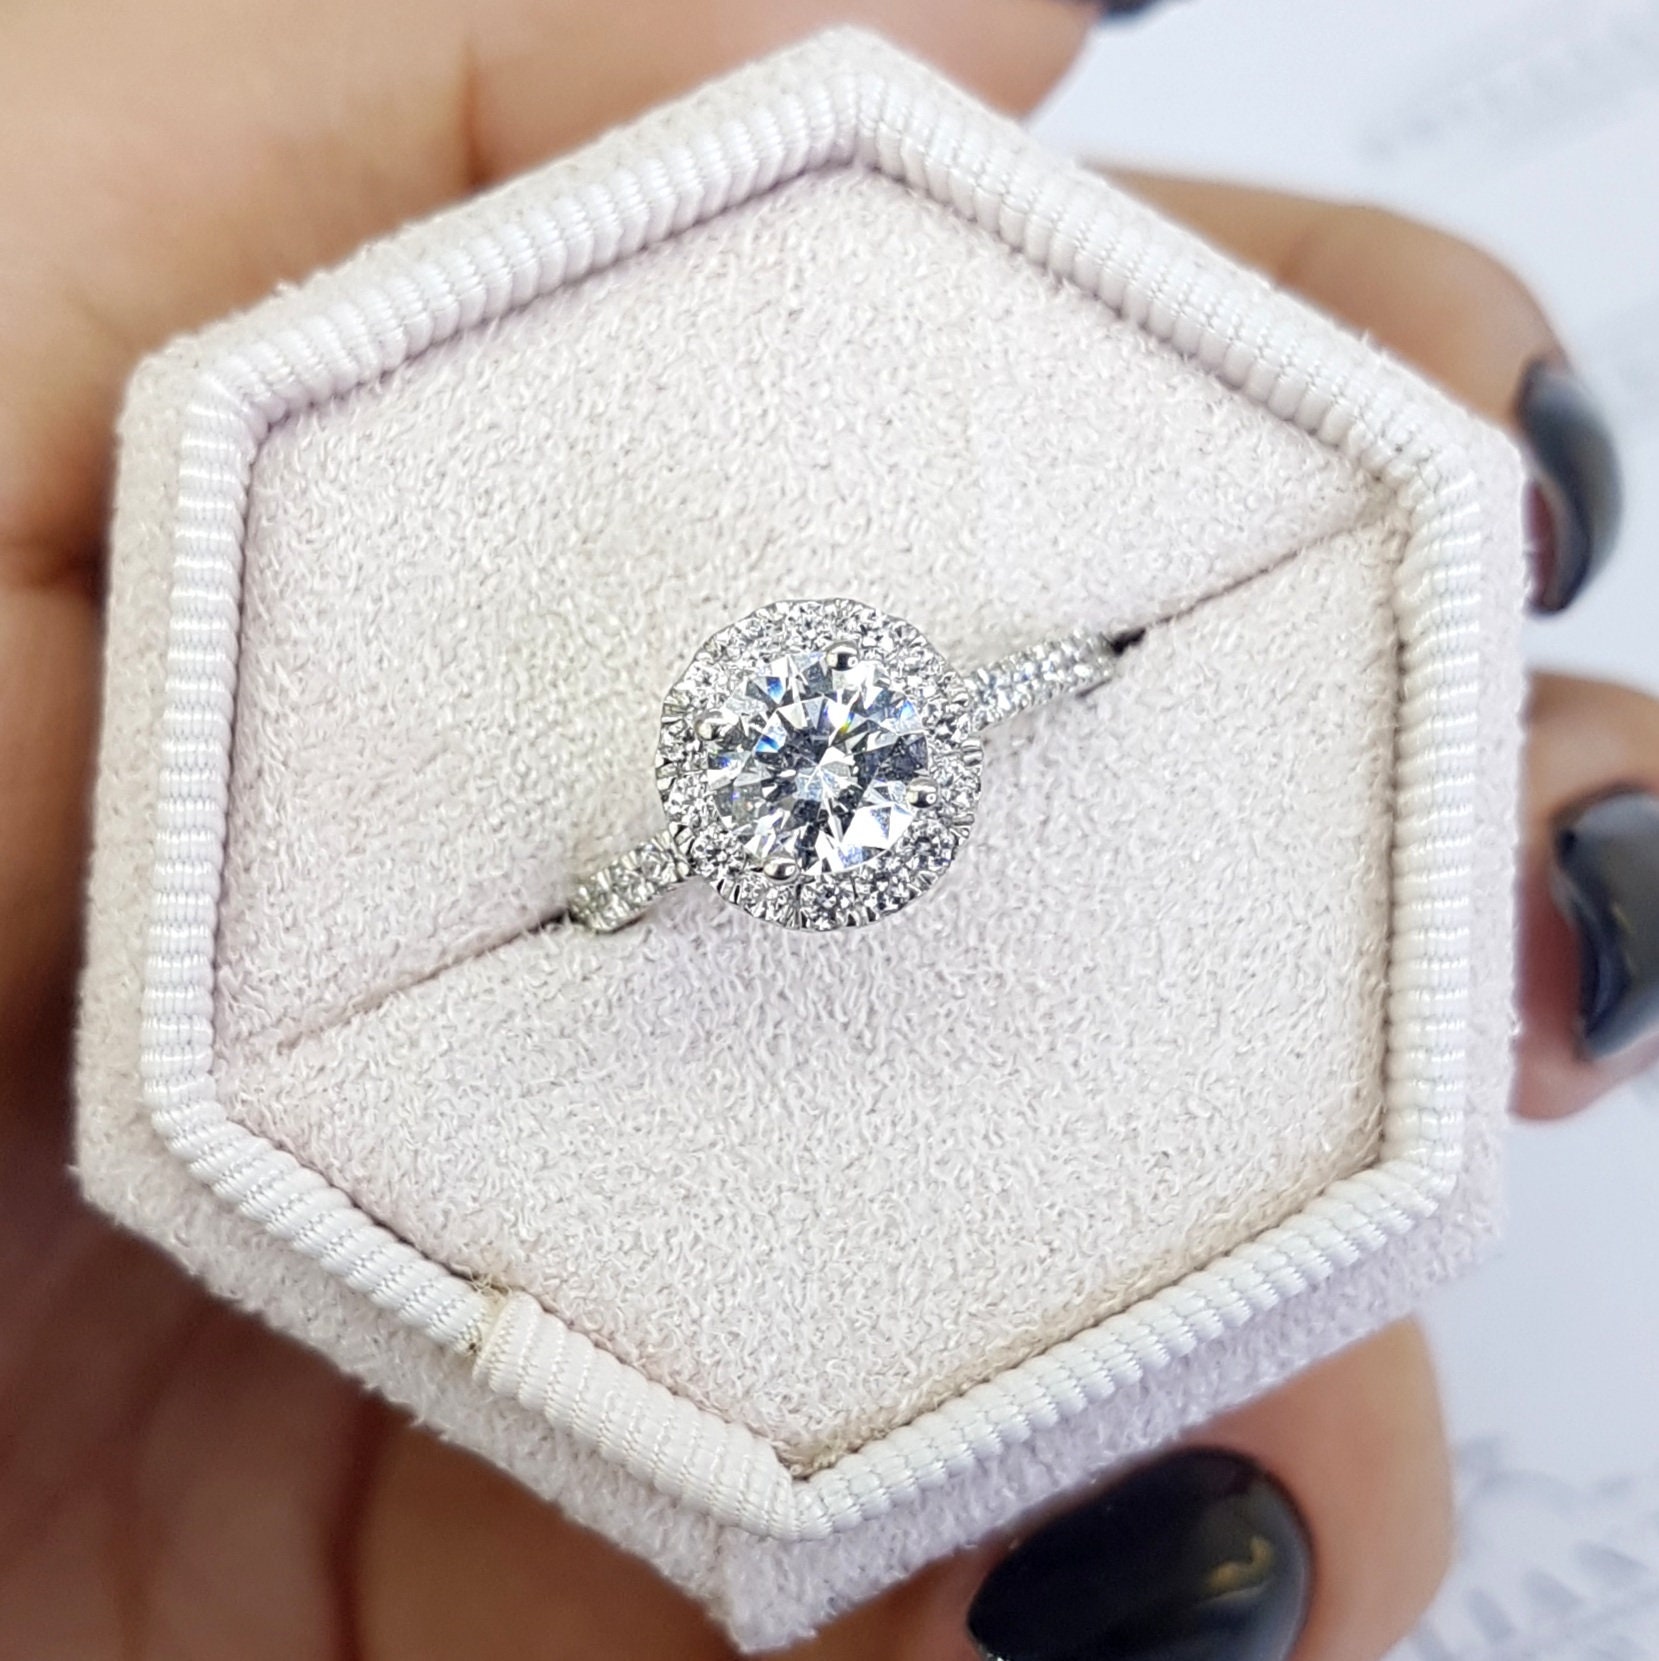 Is $10,000 a Lot For An Engagement Ring? | Shira Diamonds